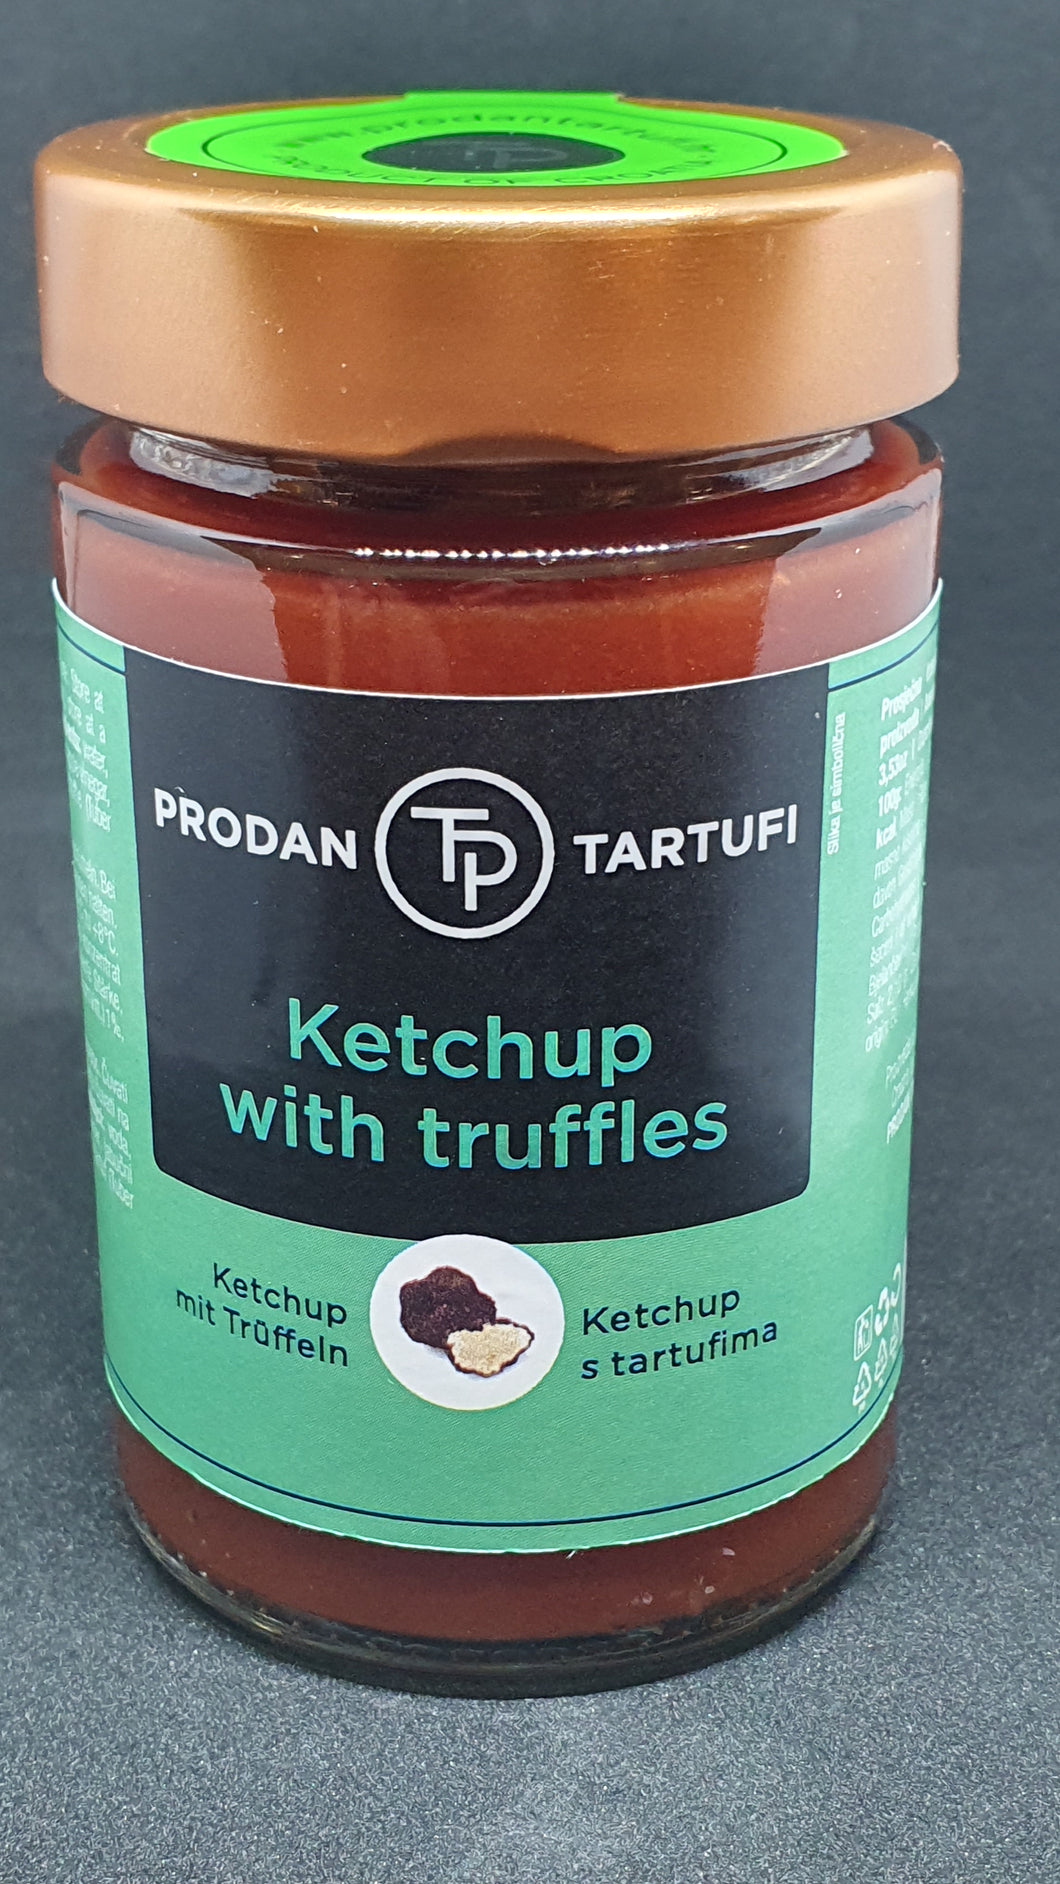 Ketchup with truffles 200g